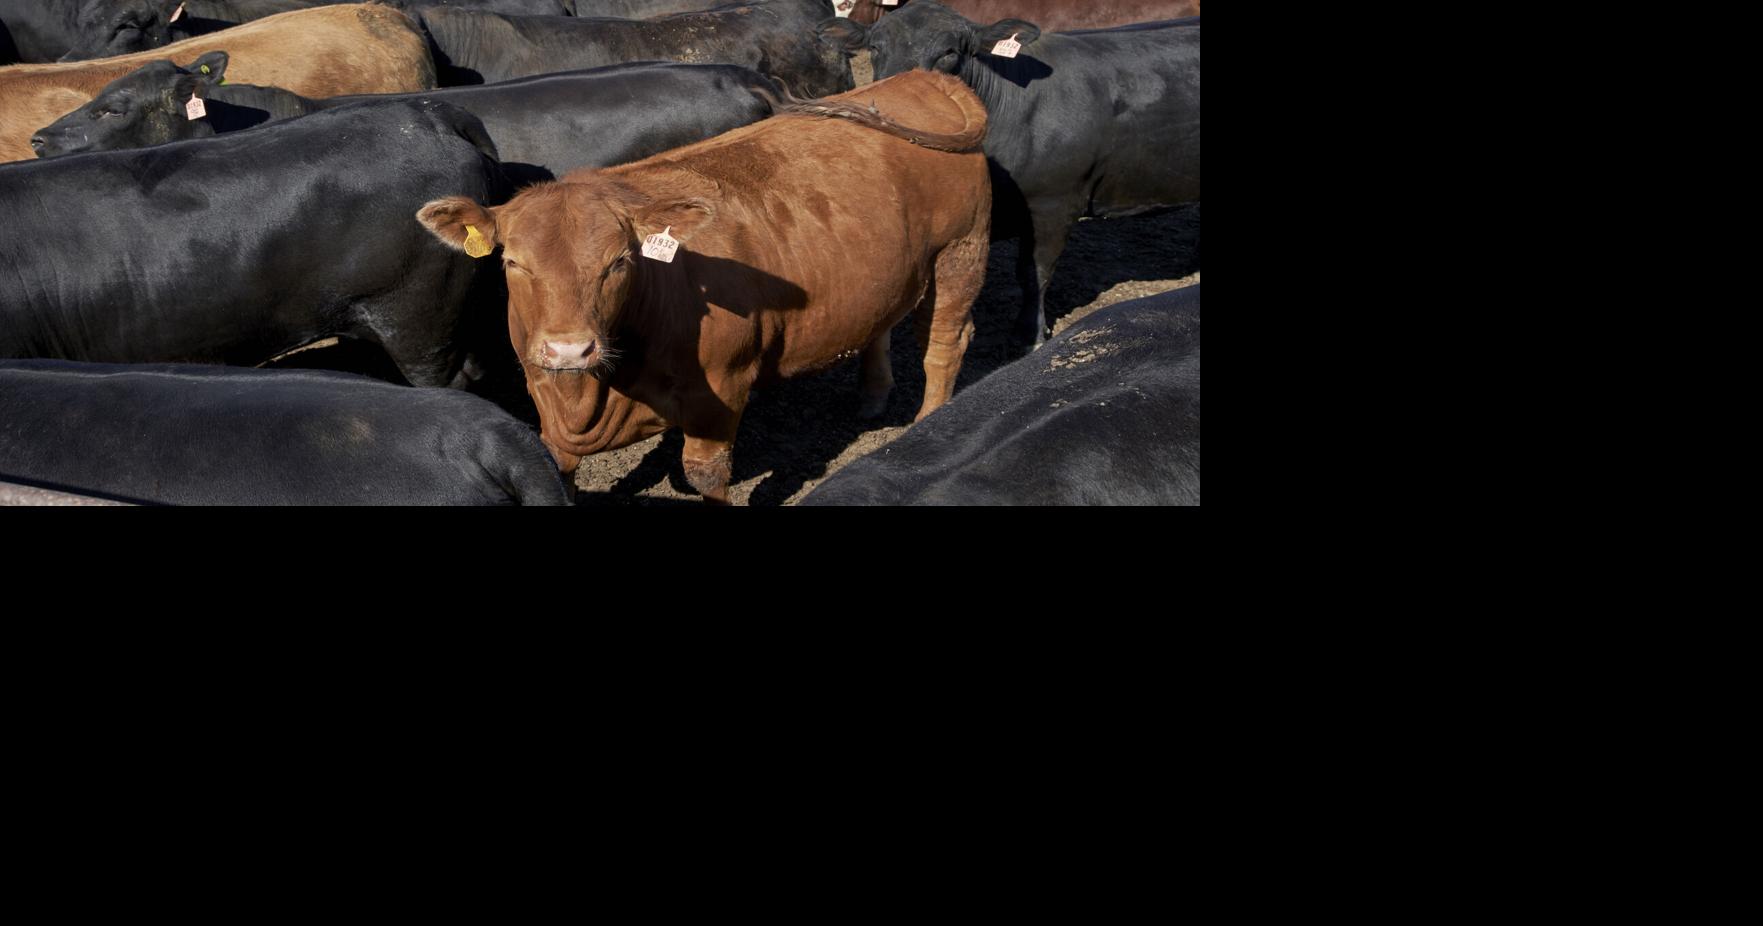 Cattle anthrax spreading in southwestern North Dakota; more than 100 animals lost